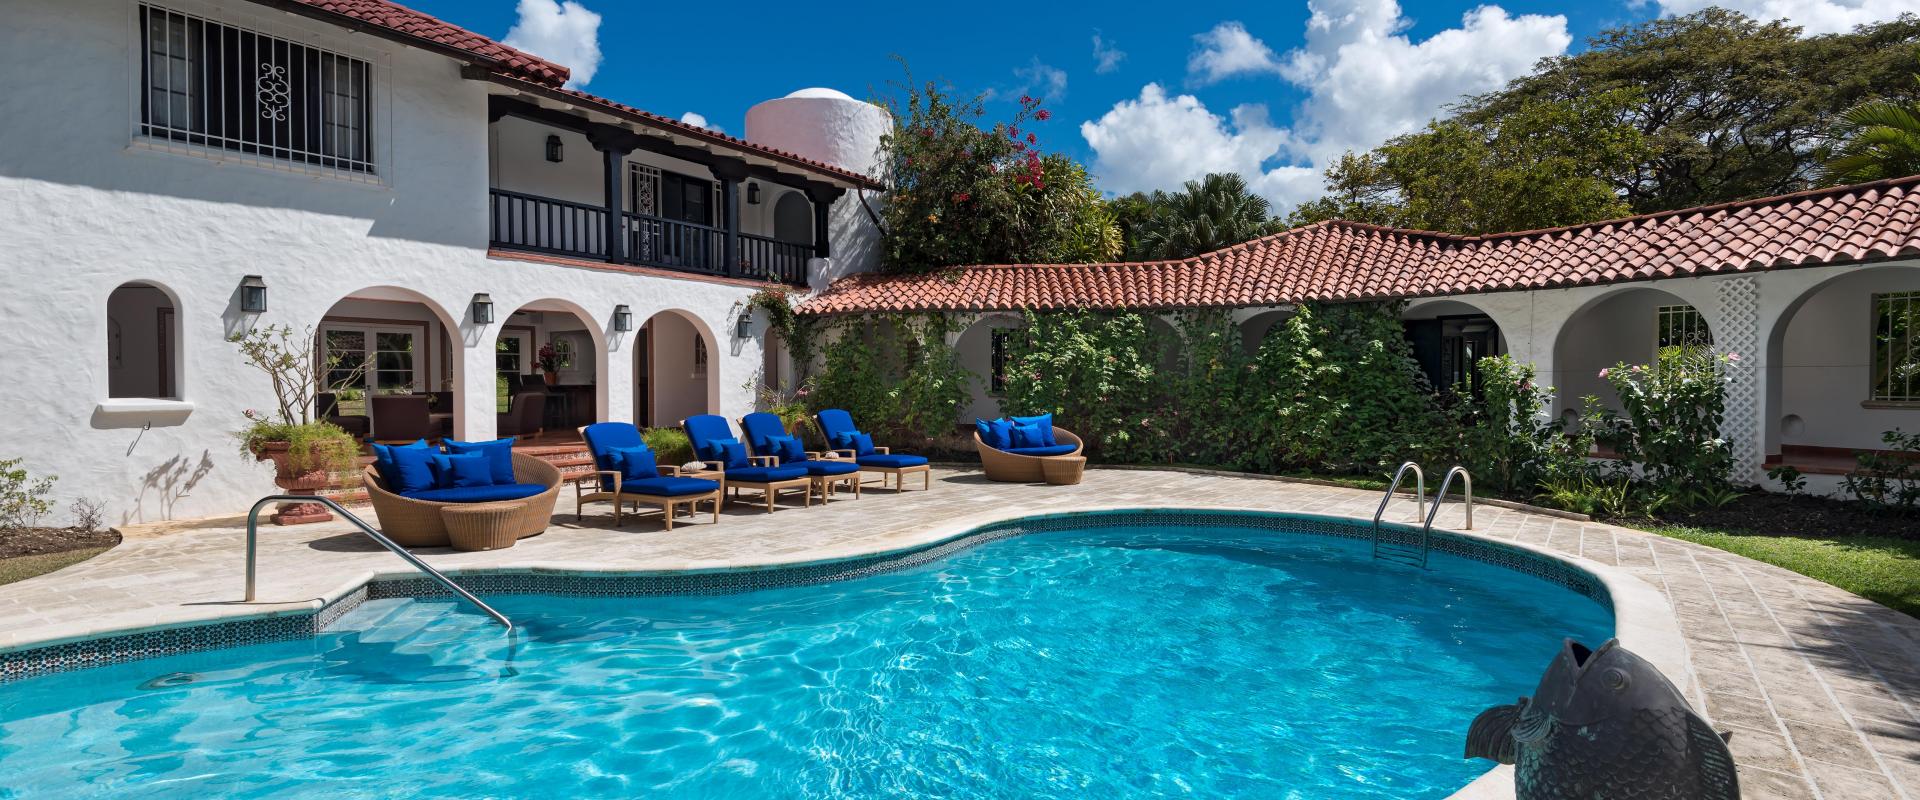 Sandy Lane, Elsewhere House/Villa For Rent in Barbados